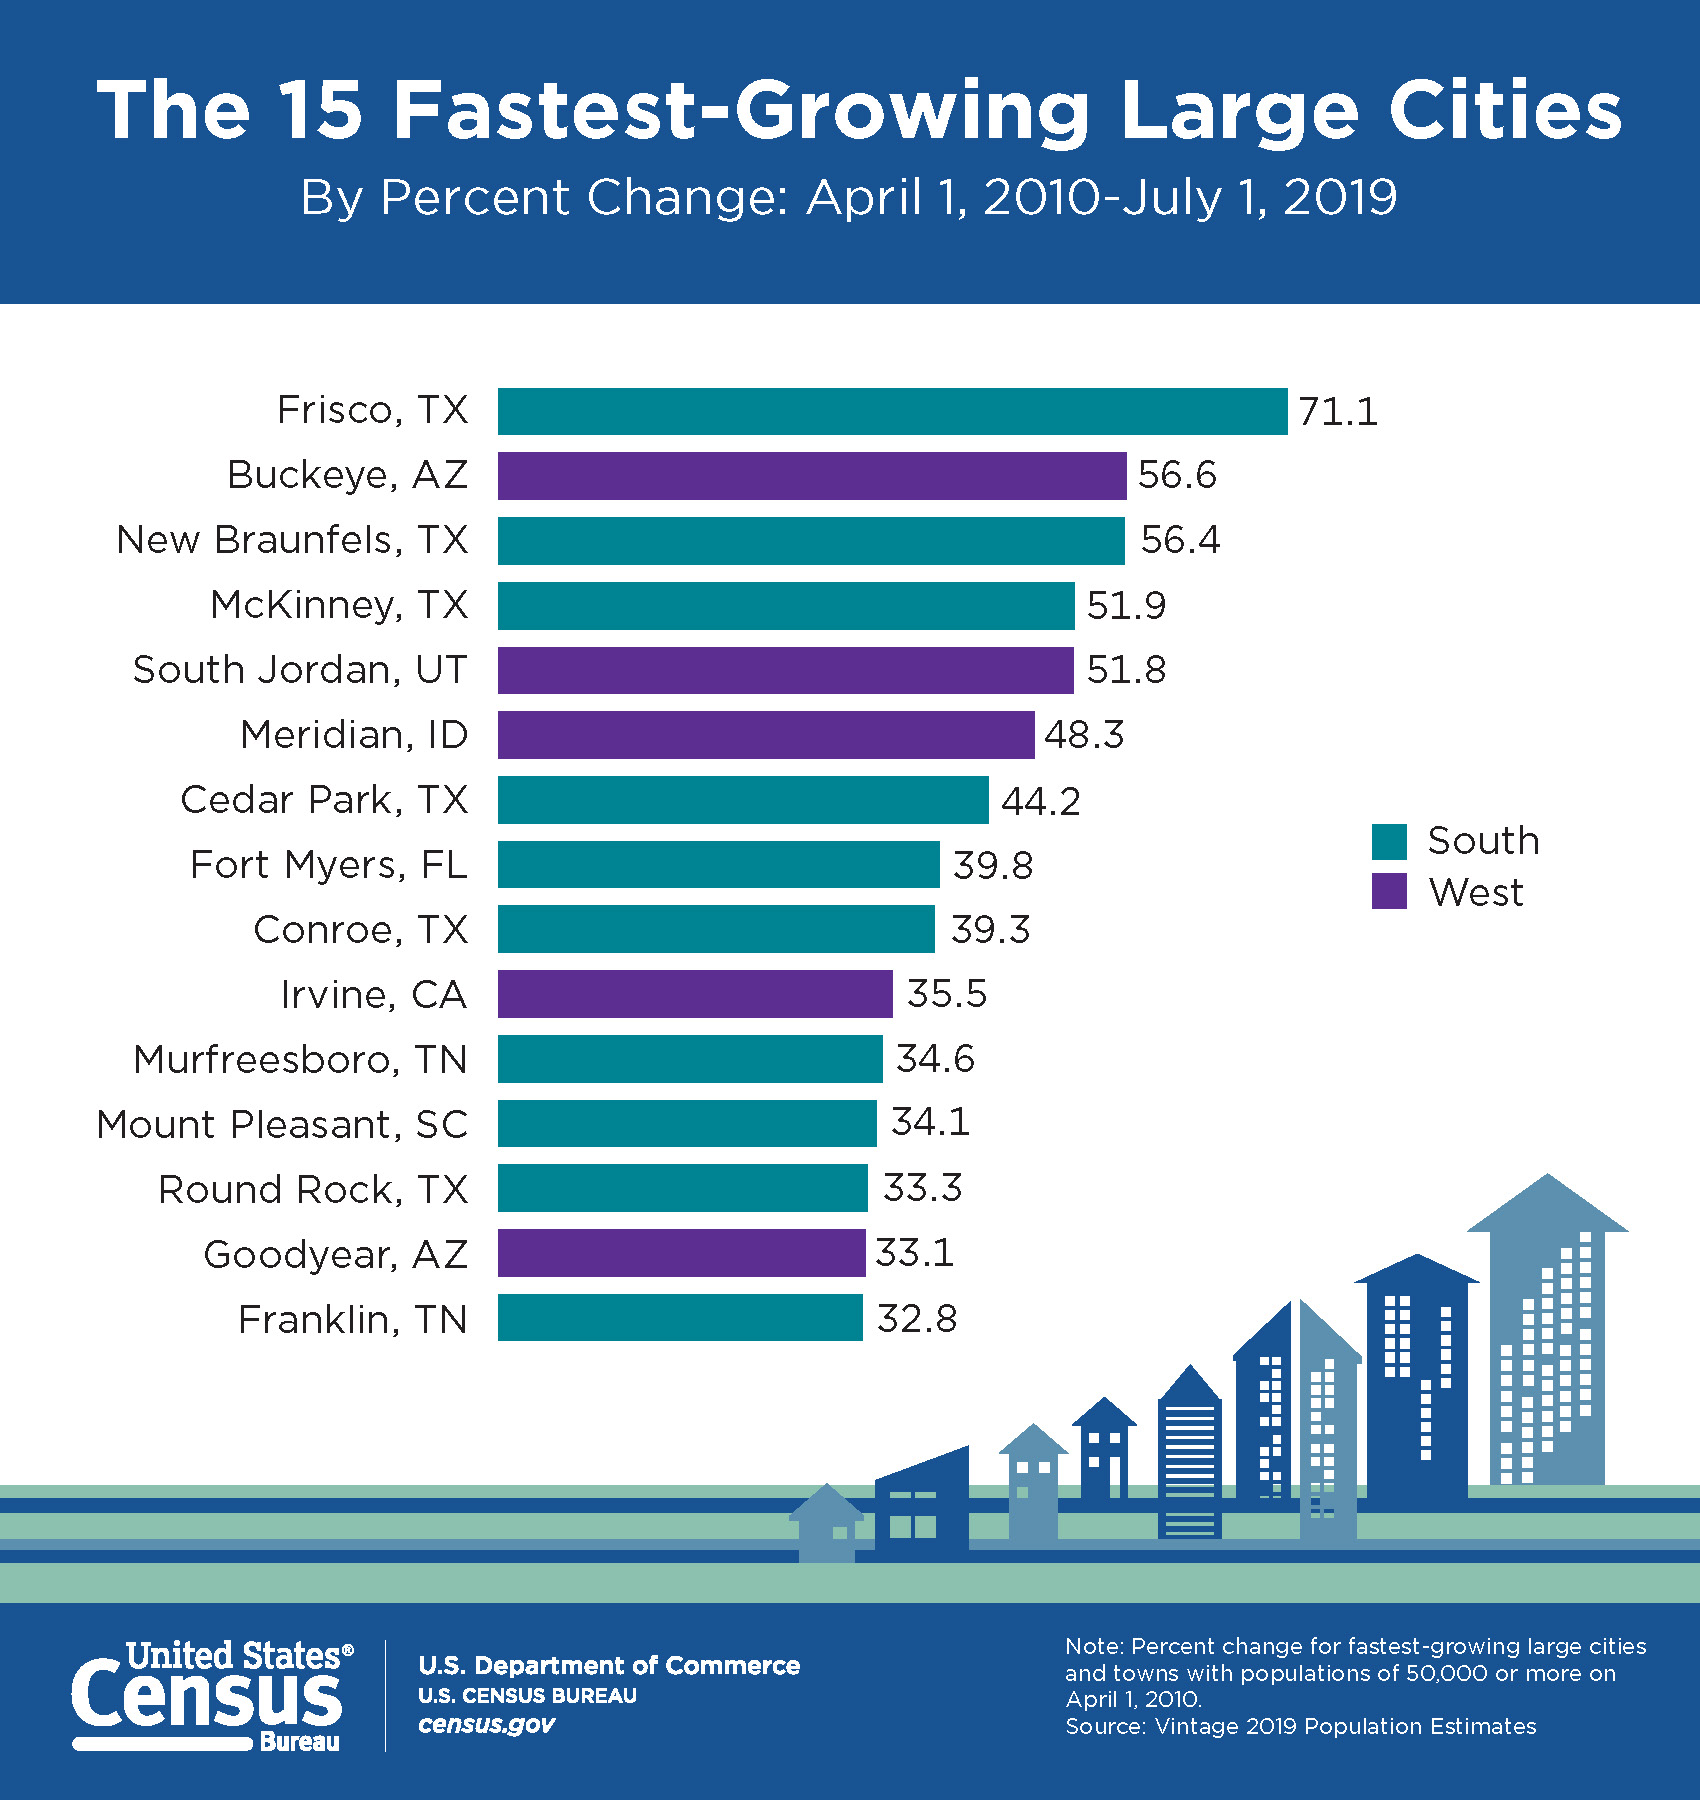 What's the fastest growing city in the USA?